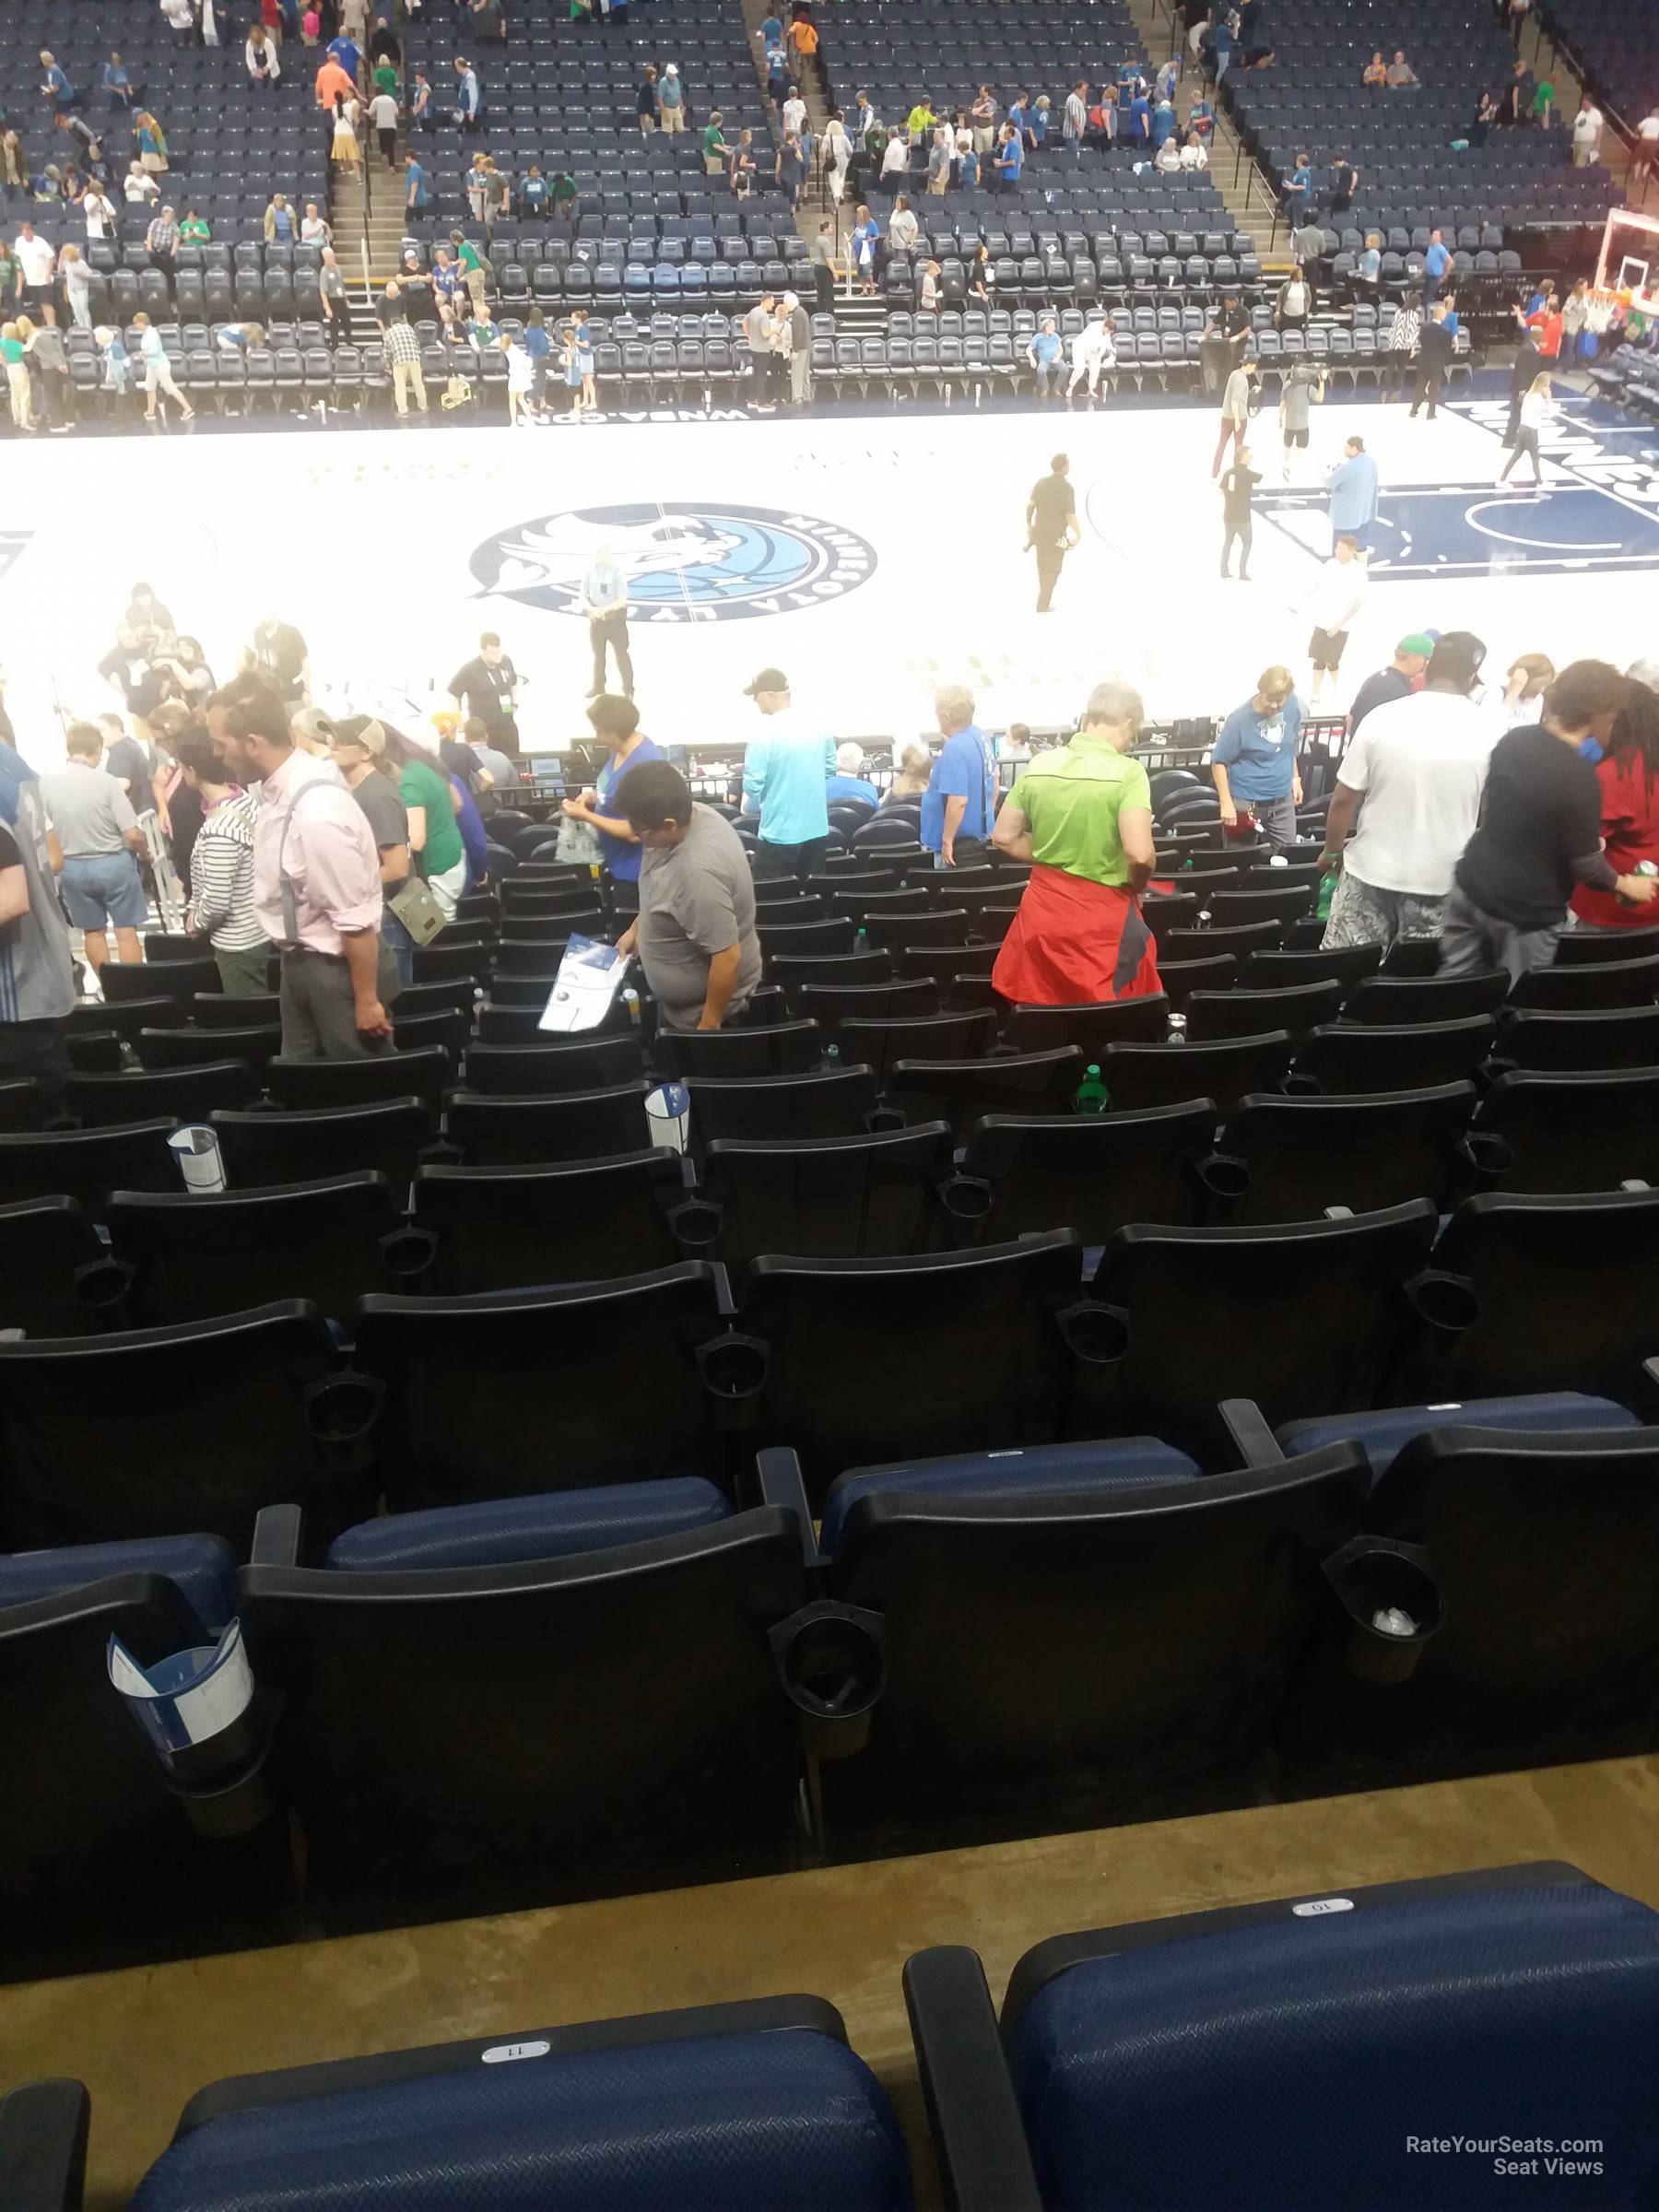 section 131, row n seat view  for basketball - target center